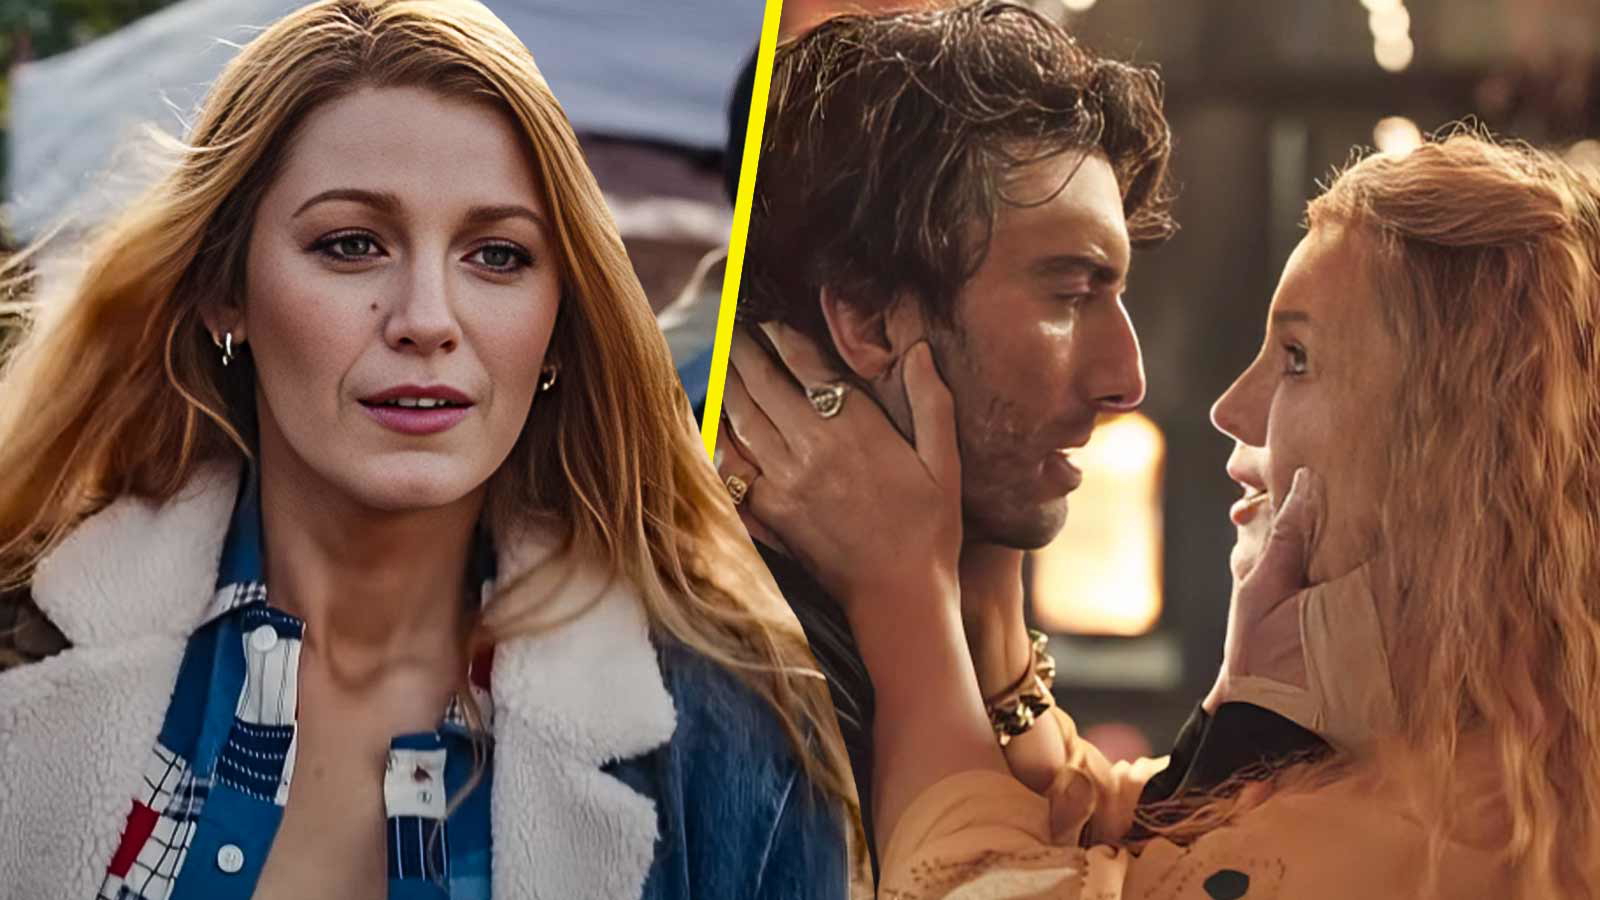 “No one did their homework”: Blake Lively’s Upcoming Film ‘It Ends With Us’ is Drowning Under the Wrath of Fans For Using a Song About Cannibalism in the Trailer